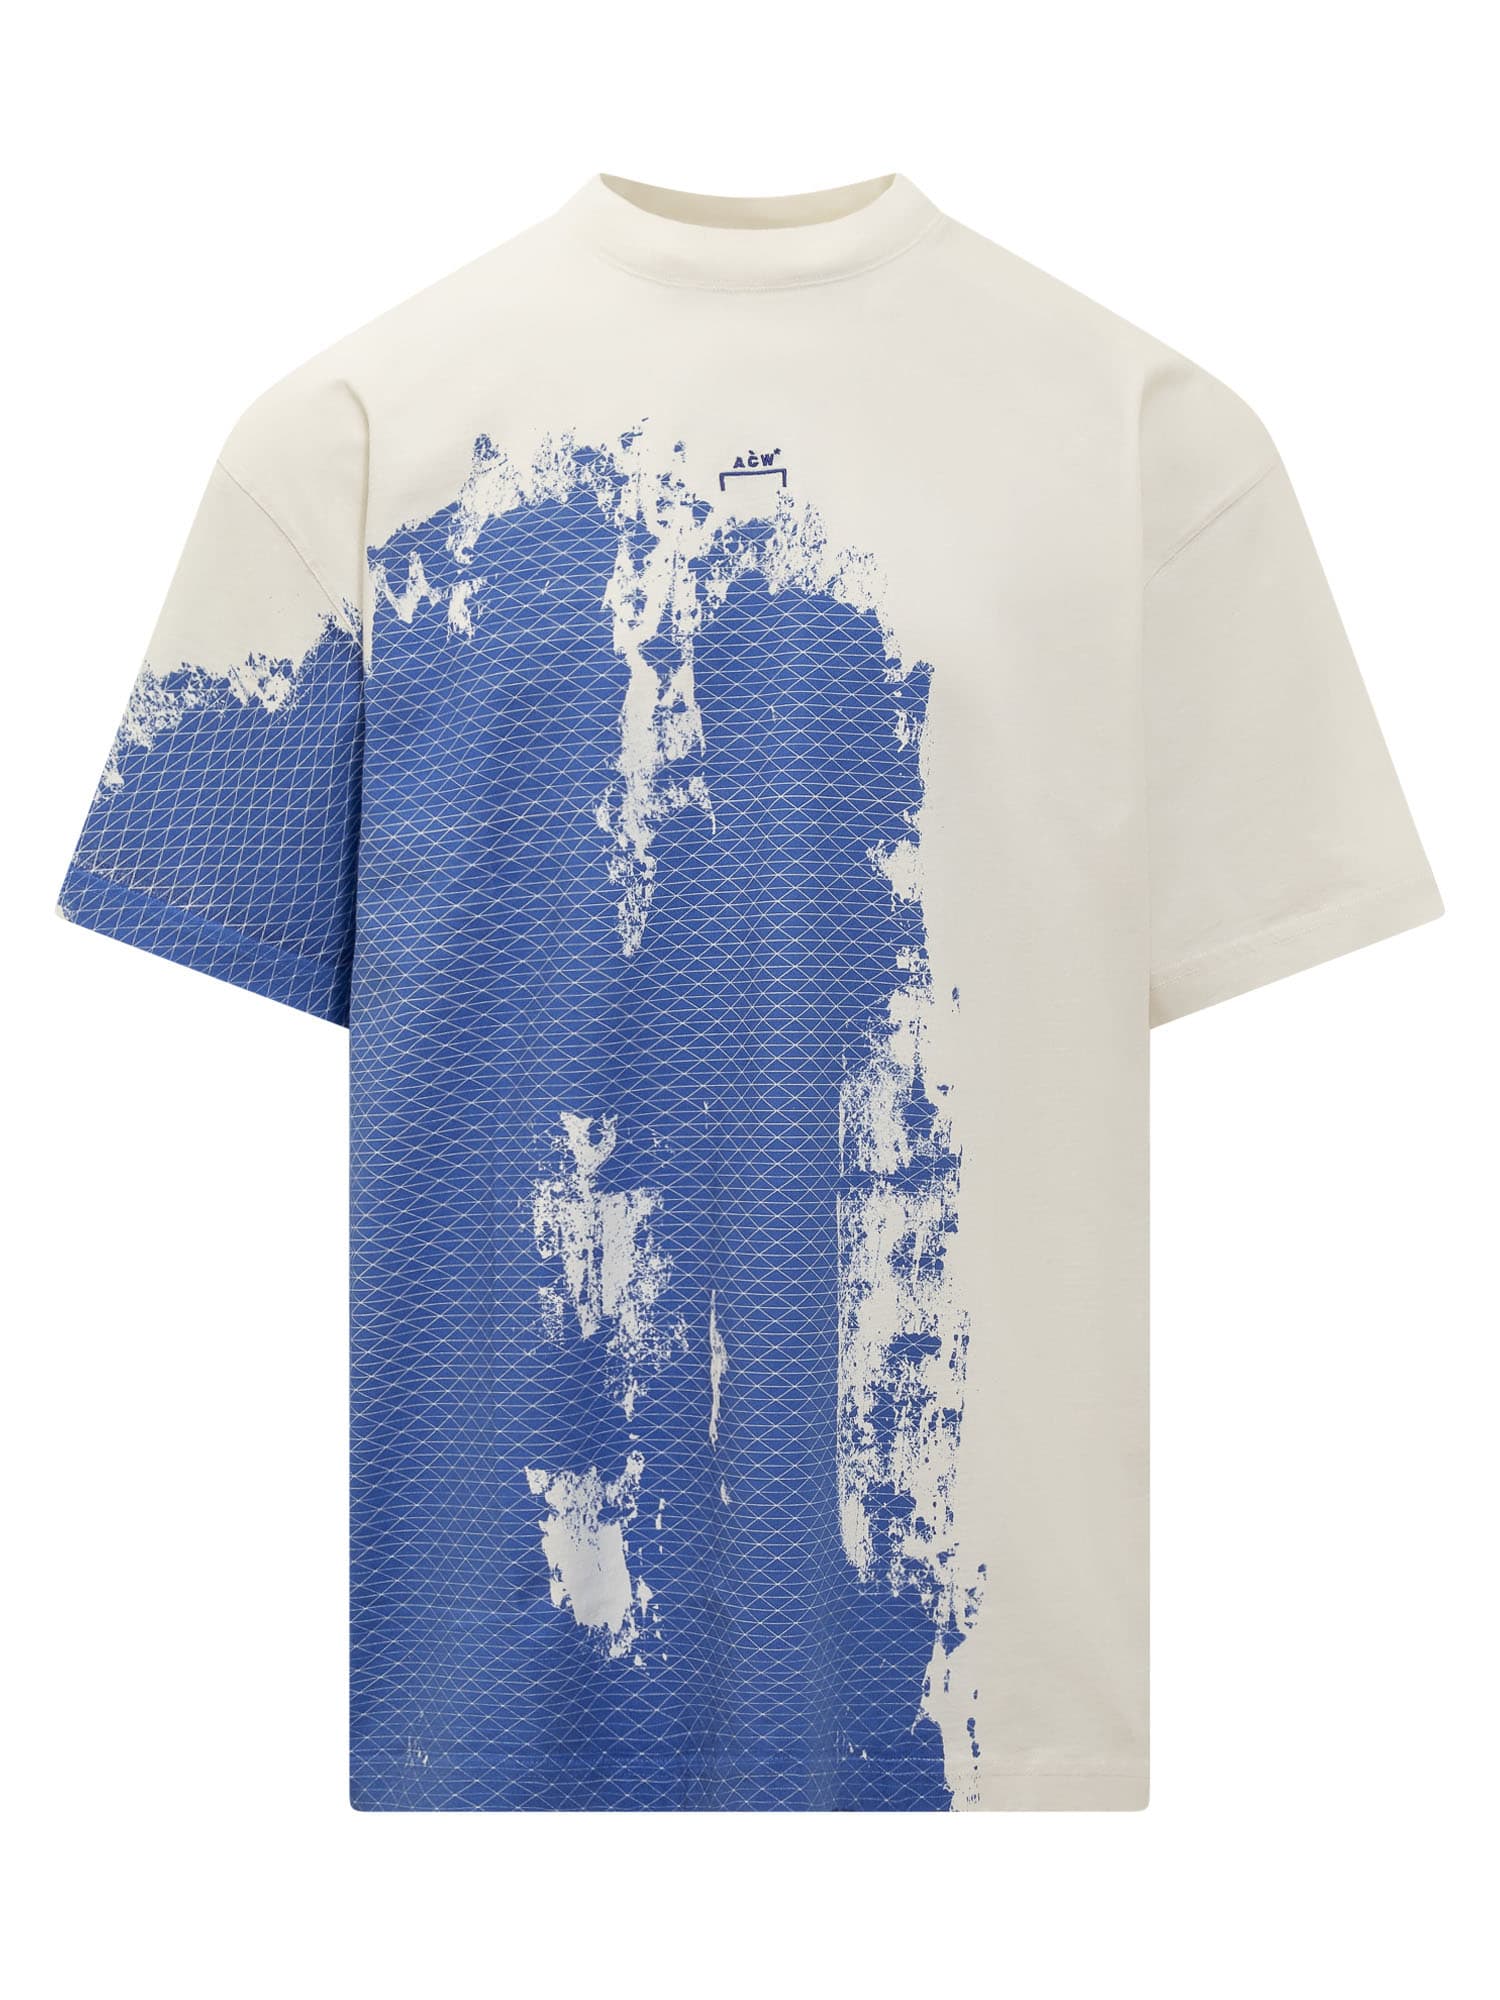 A-COLD-WALL* BRUSHSTROKE T-SHIRT